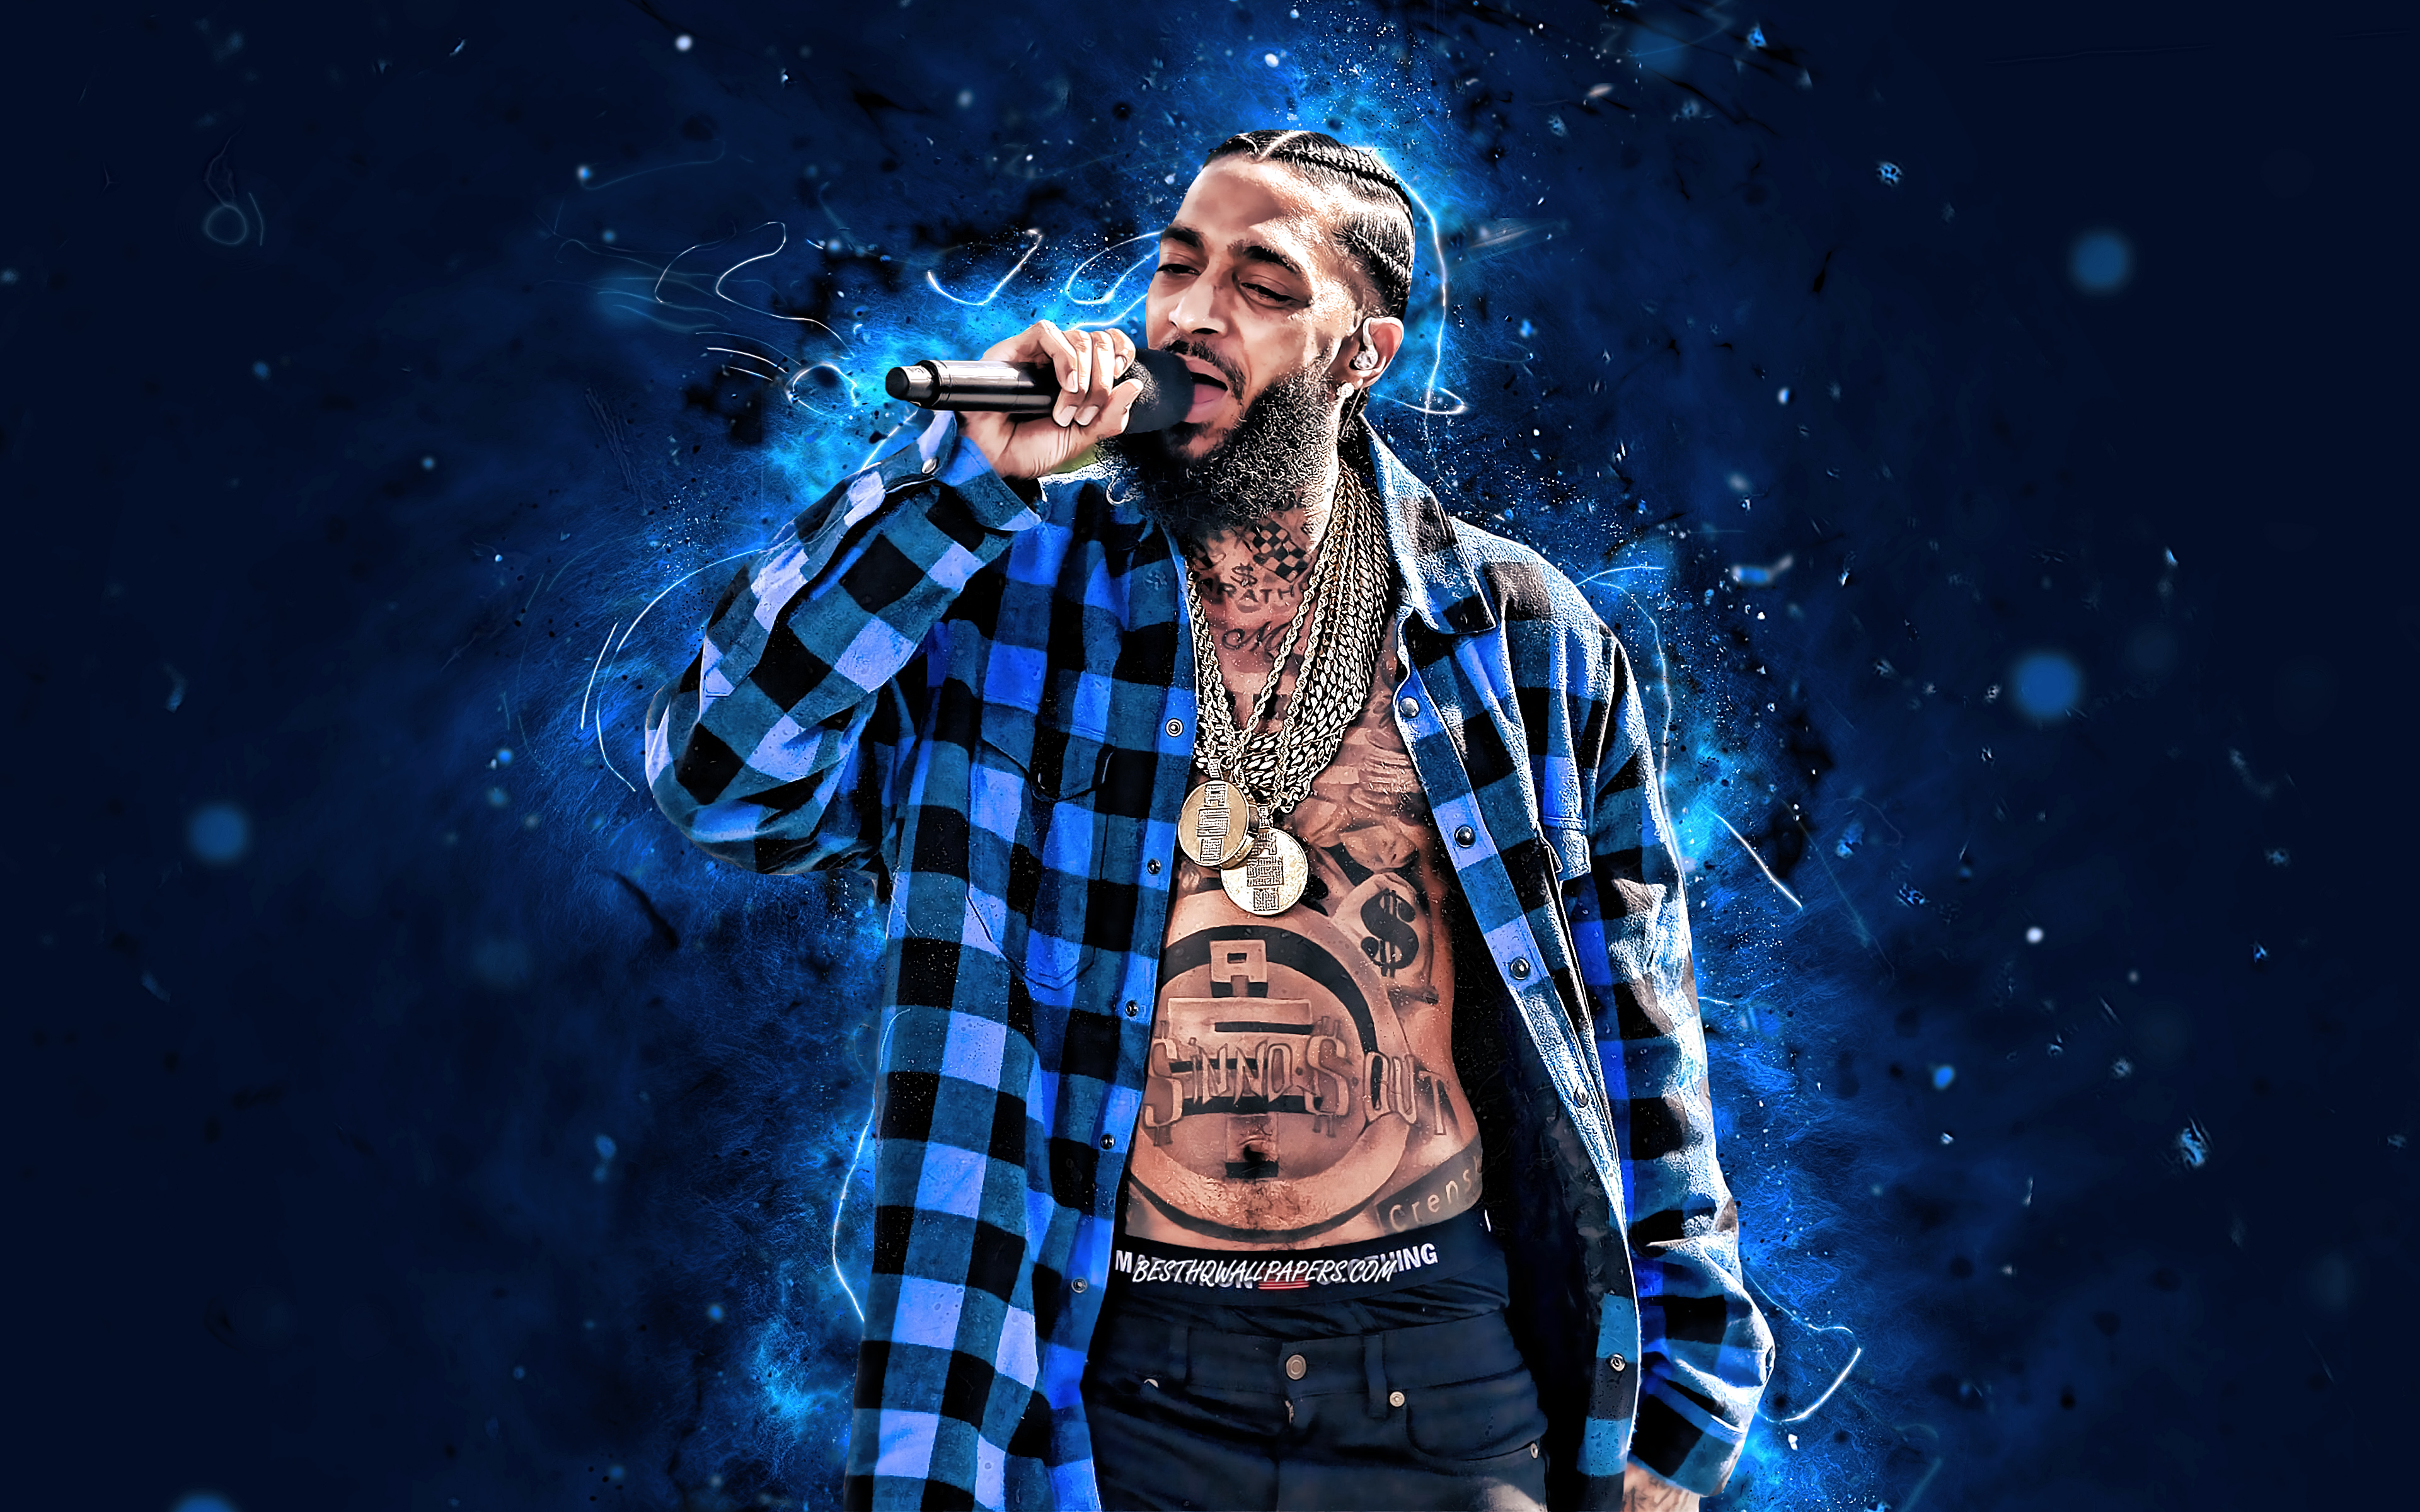 Download wallpapers Nipsey Hussle 2020 american rapper red neon lights  4K music stars creative Ermias Joseph Asghedom american celebrity  Nipsey Hussle 4K for desktop free Pictures for desktop free